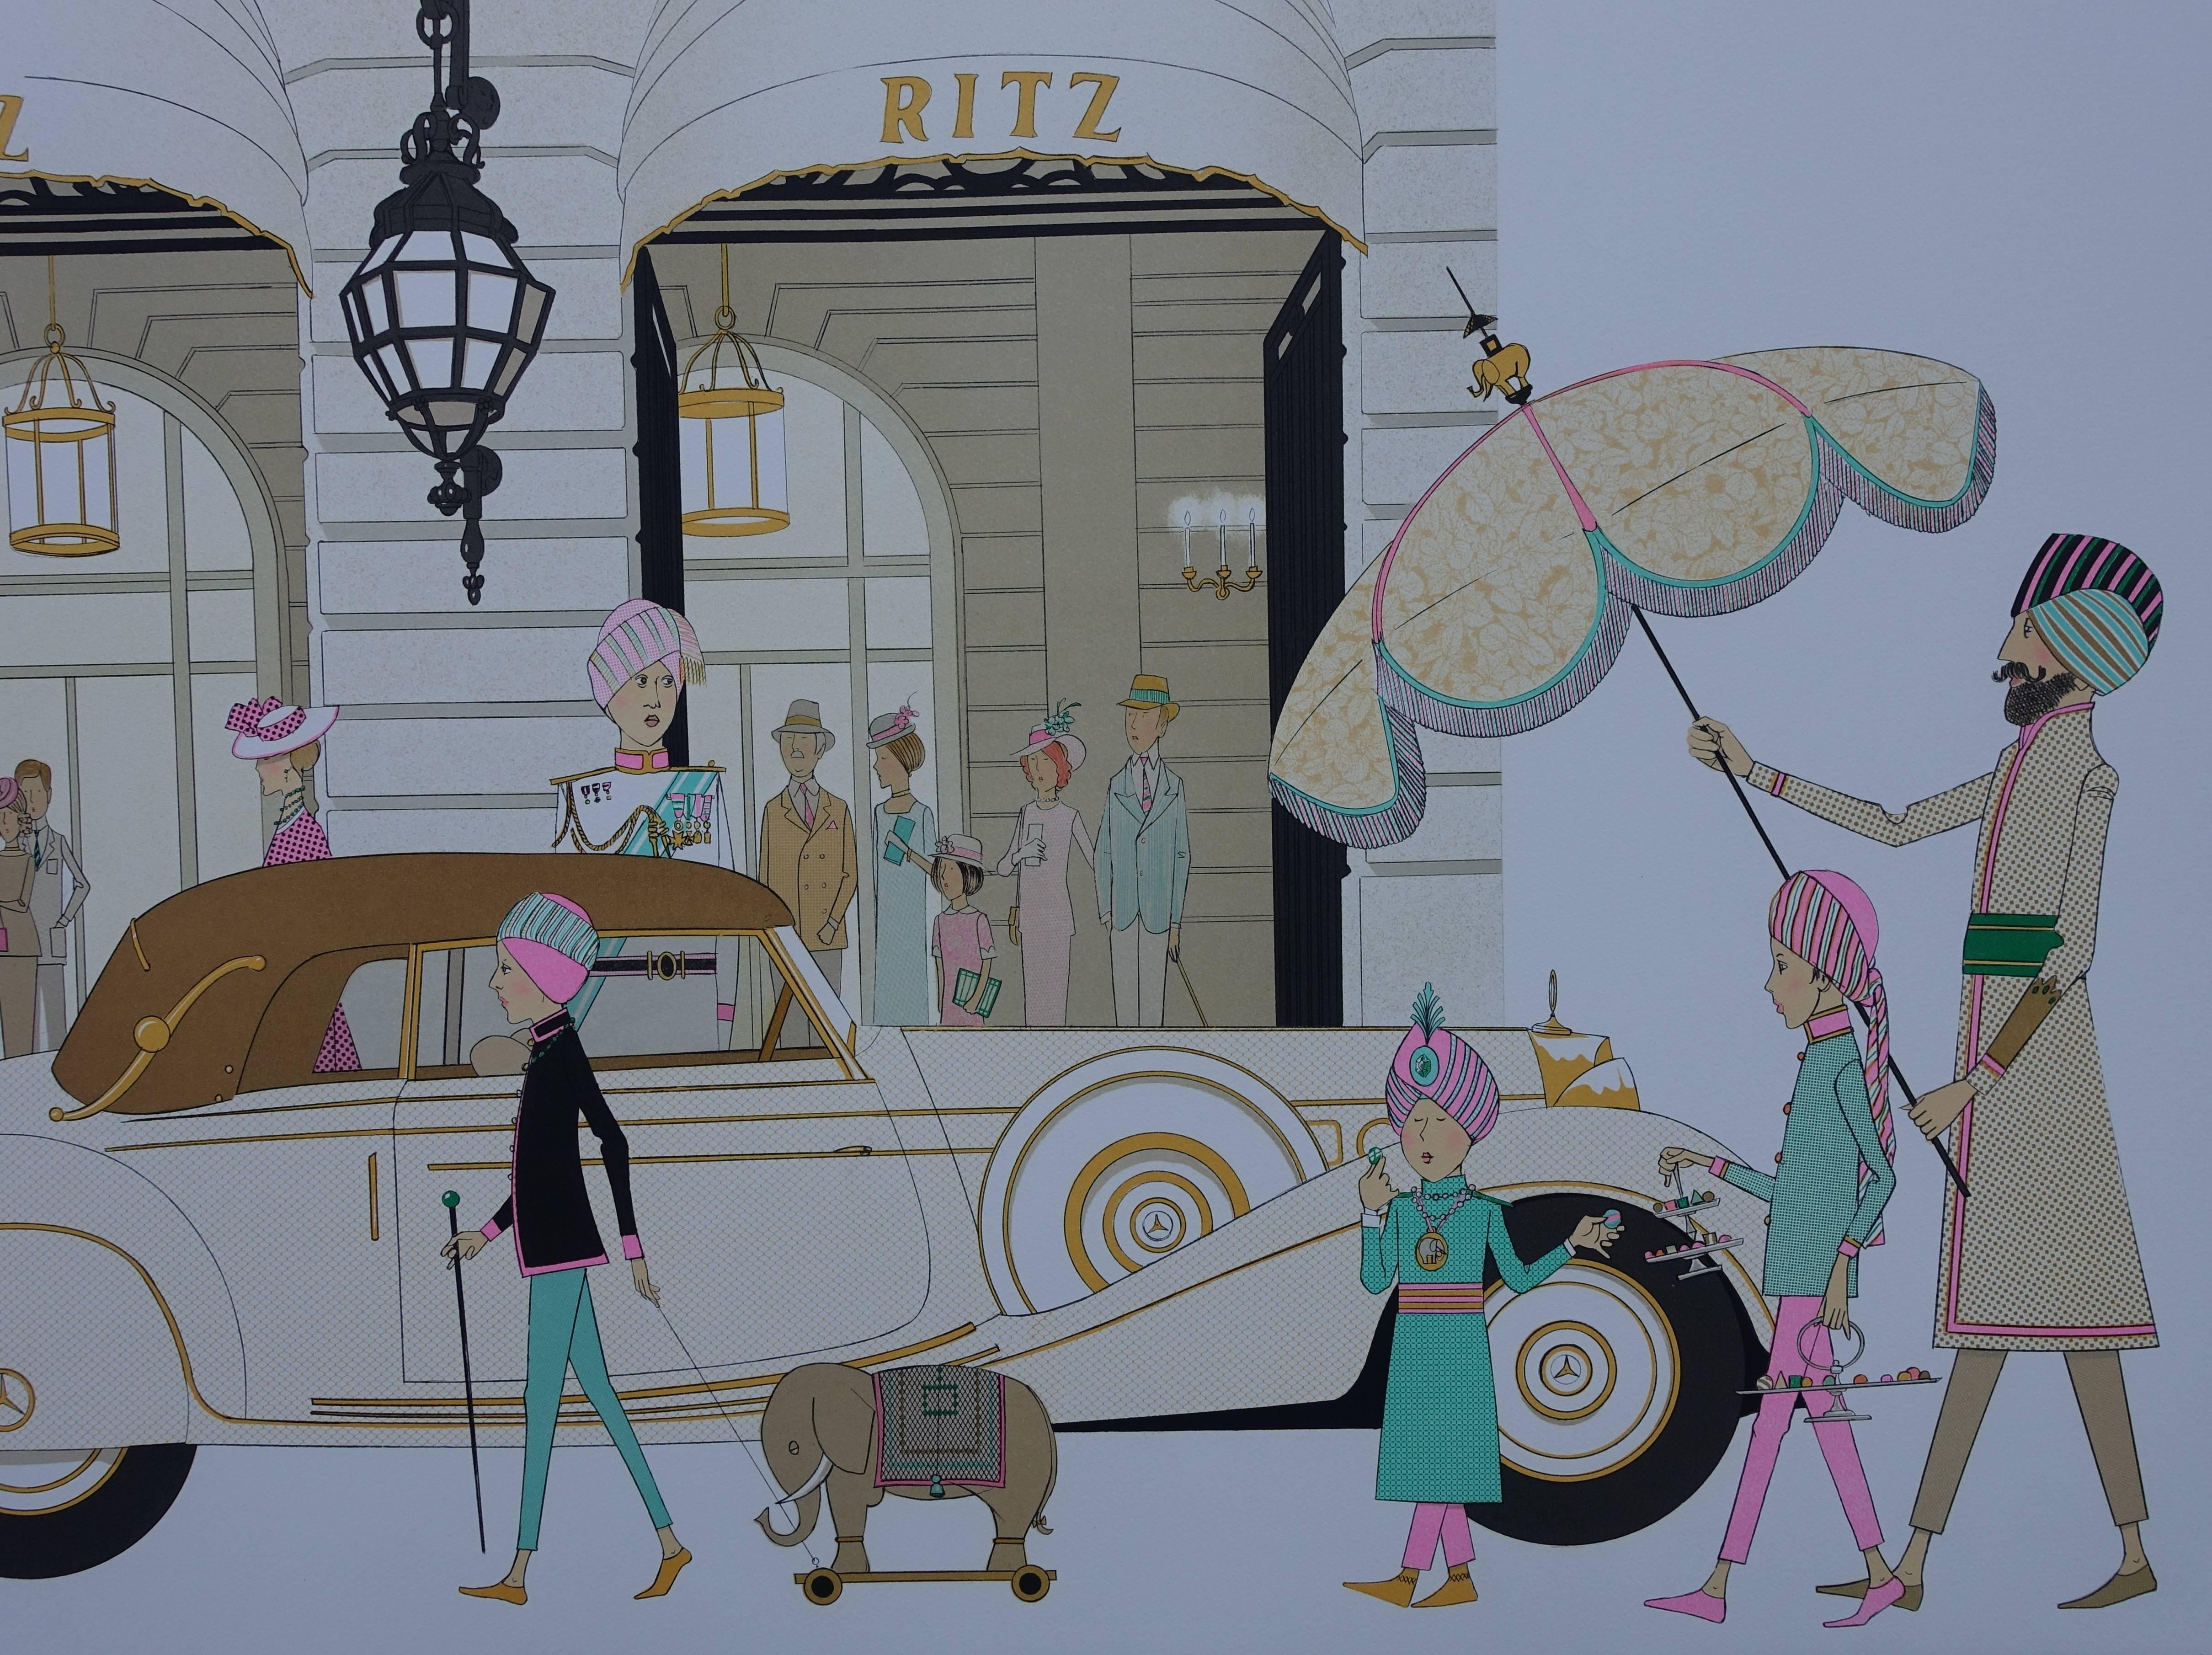 Mercedes Cabriolet 770 and HOTEL RITZ in PARIS - Signed lithograph - 115ex - Print by Denis Paul Noyer